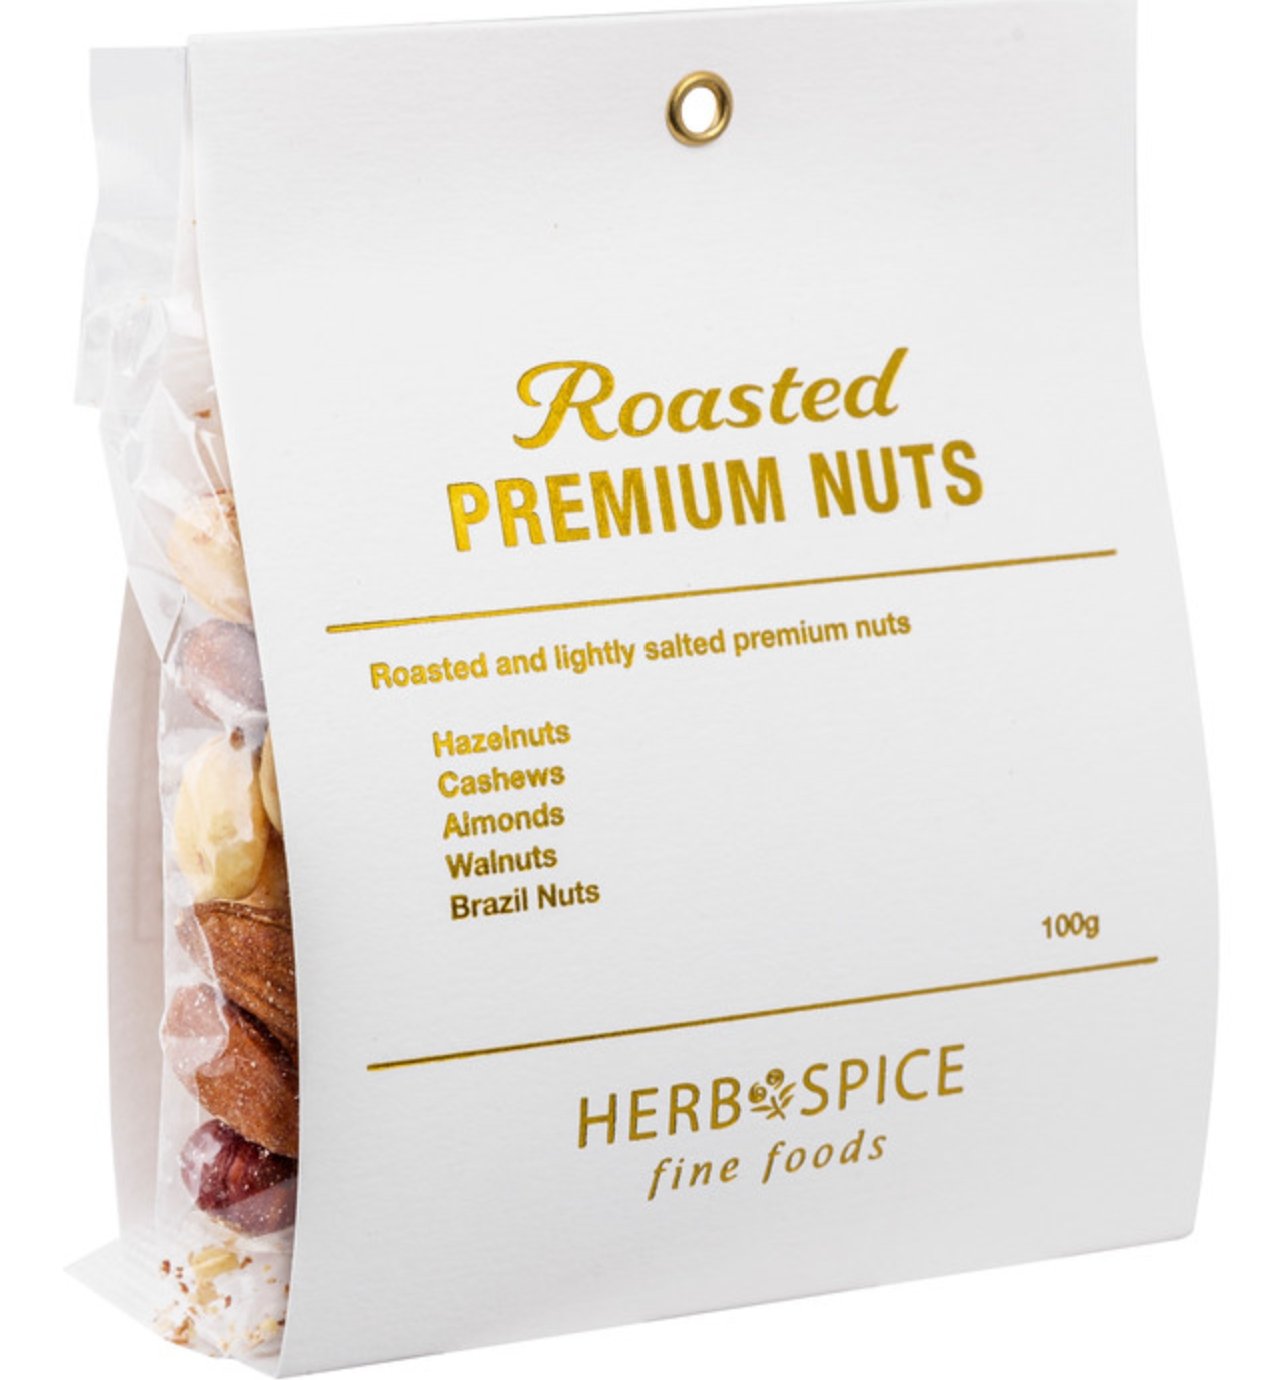 Premium Roasted and Salted Nut Mix - Beautiful Gifts - Packaged with Love